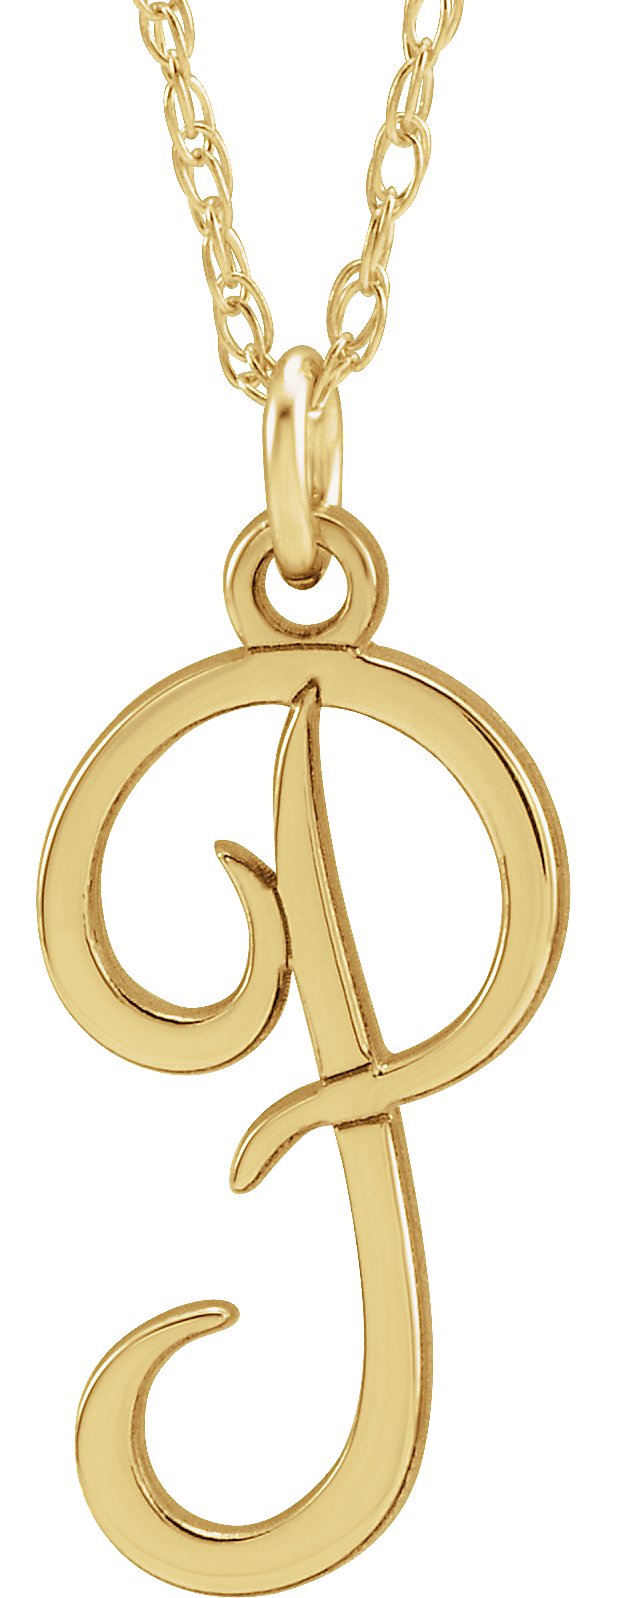 14K Yellow Gold-Plated Sterling Silver Script Initial P 16-18" Necklace